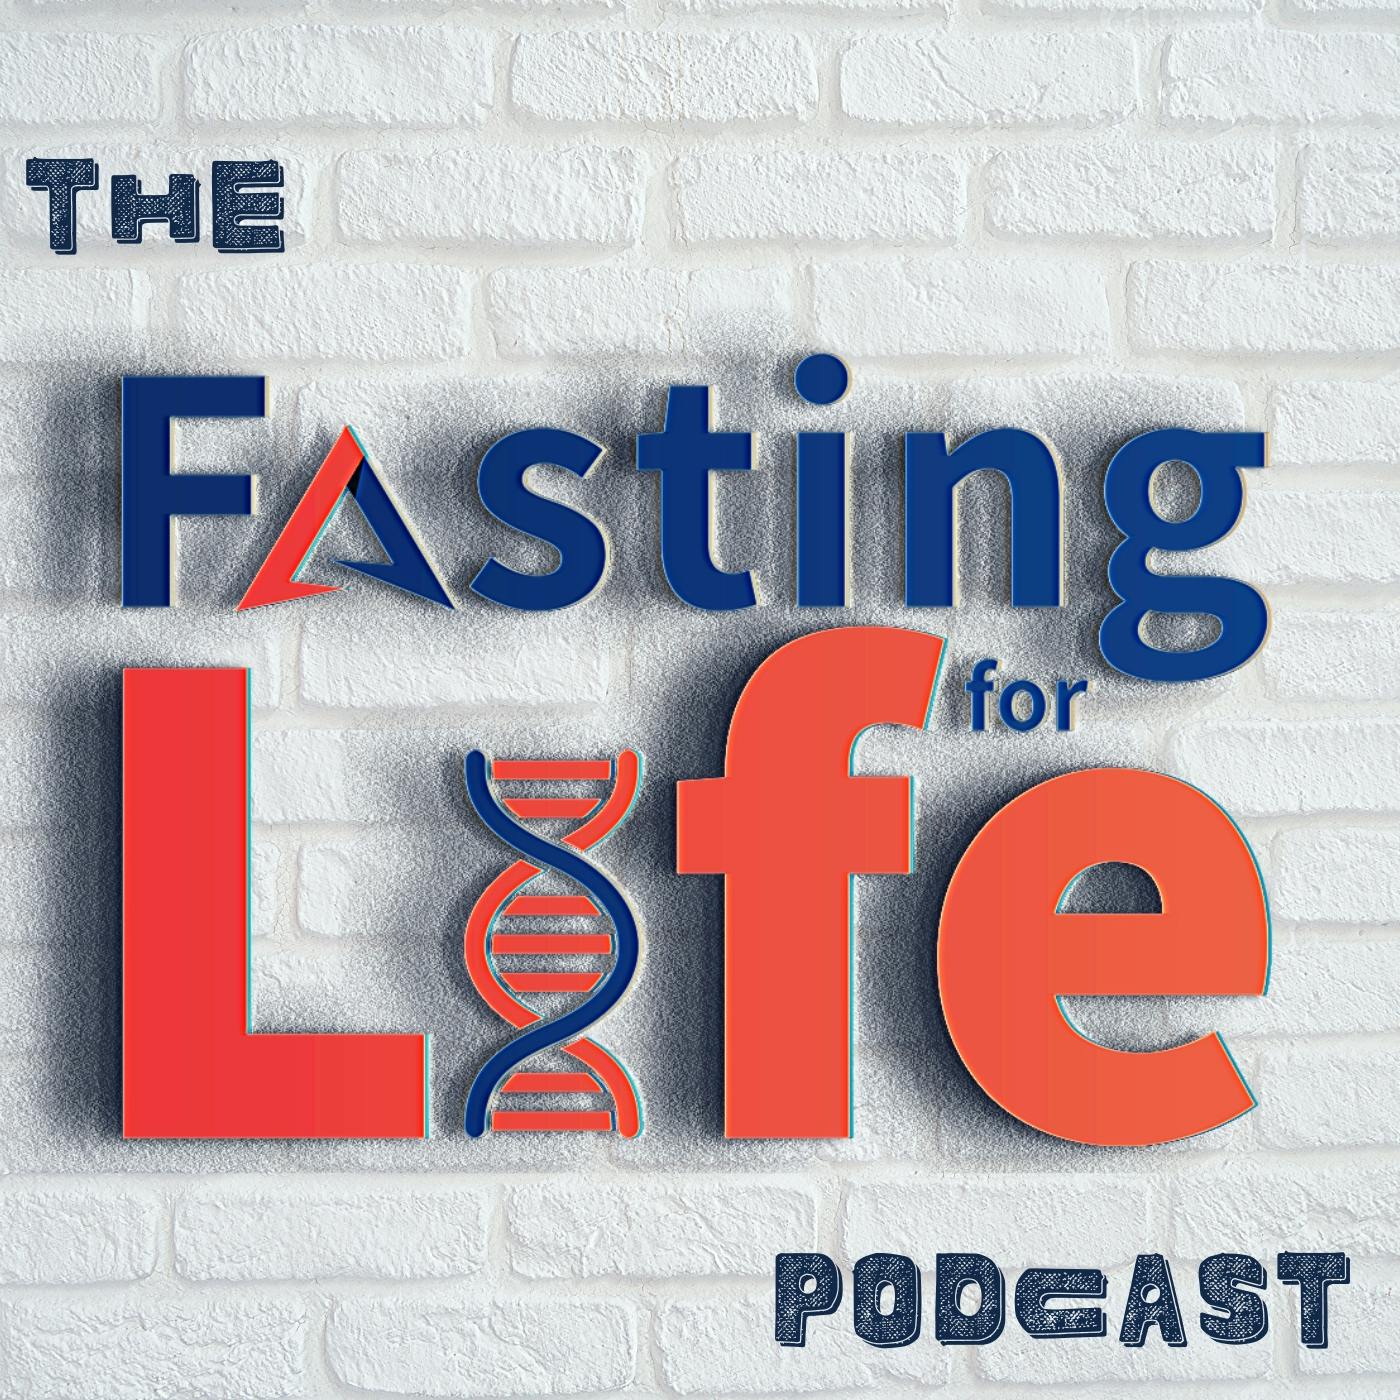 Ep. 42 - Fasting Improves Cholesterol & Triglycerides | Alternate Day Fasting and Heart Health, Decrease in LDL-C & Triglycerides Fasting, Adiponectin Boost | Statins, Cardioprotection, Anti-Inflammat